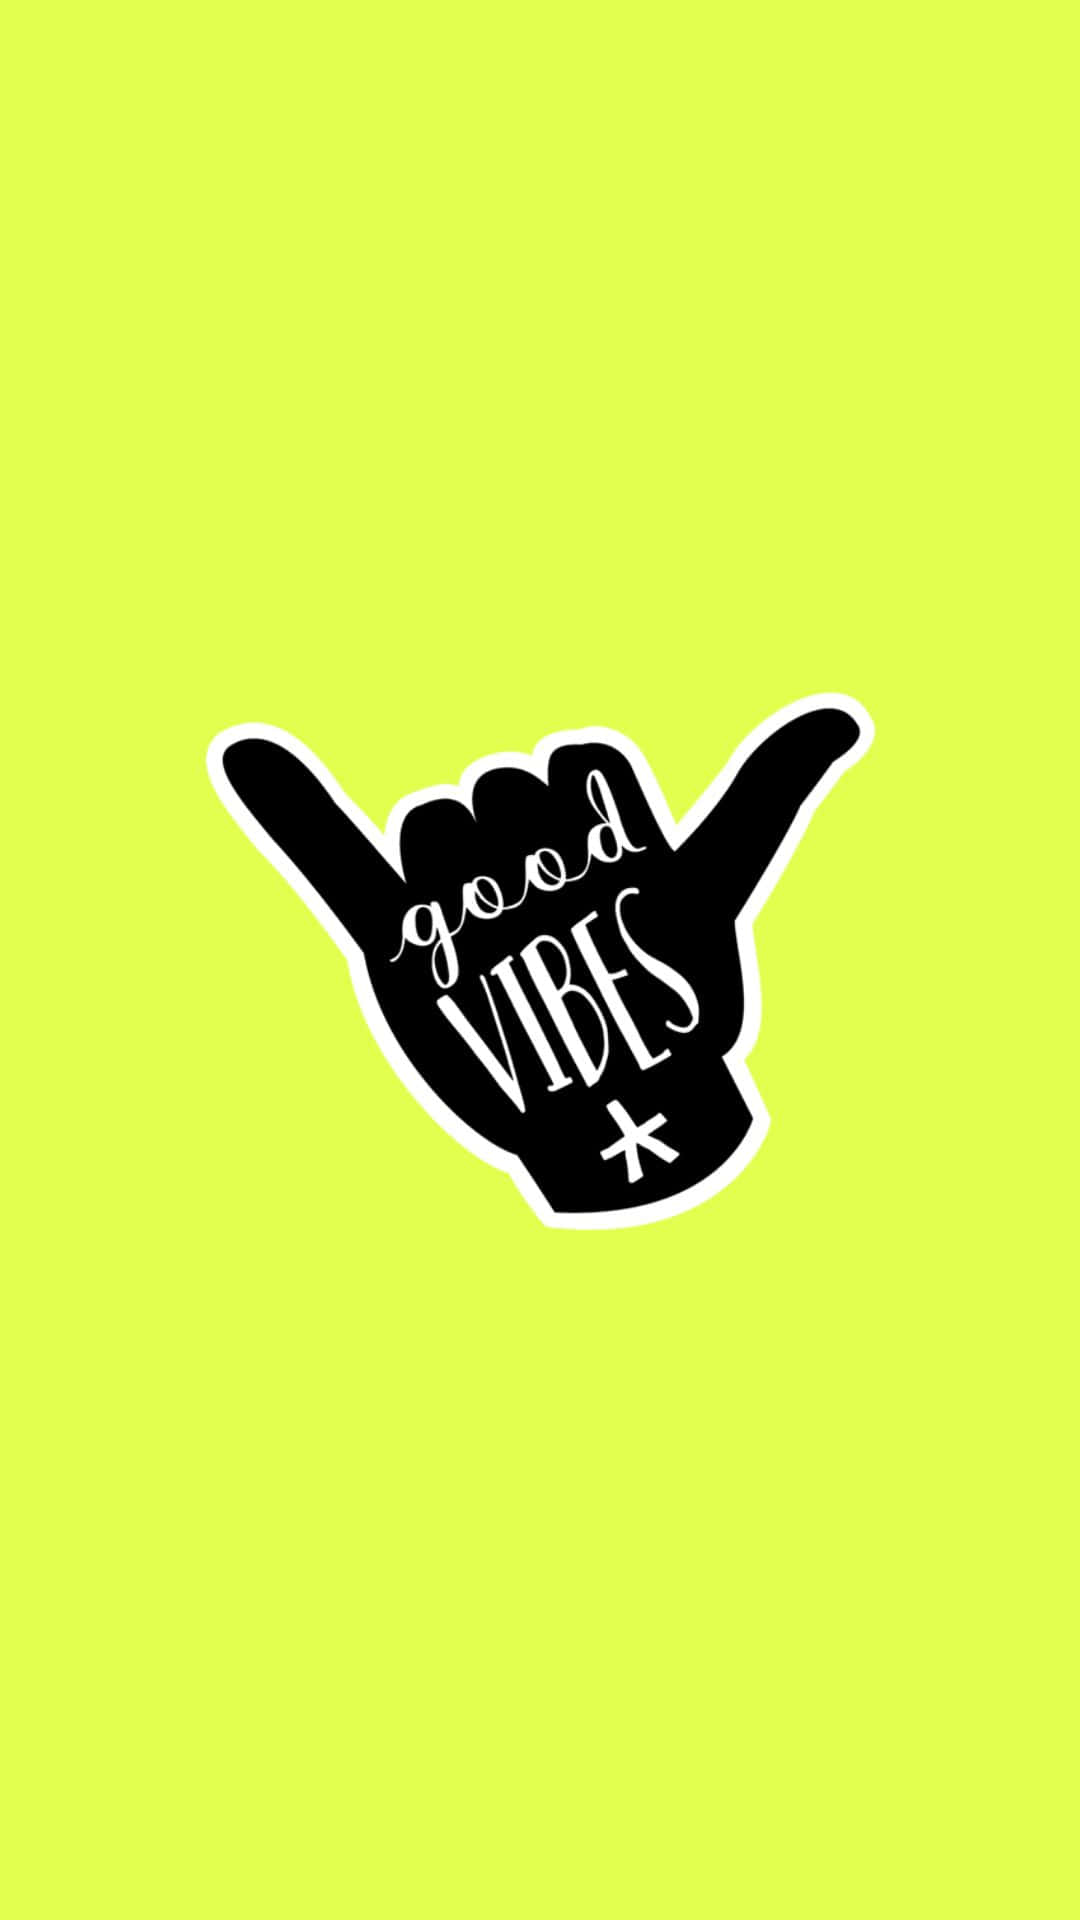 Download Vibes Iphone Wallpaper 